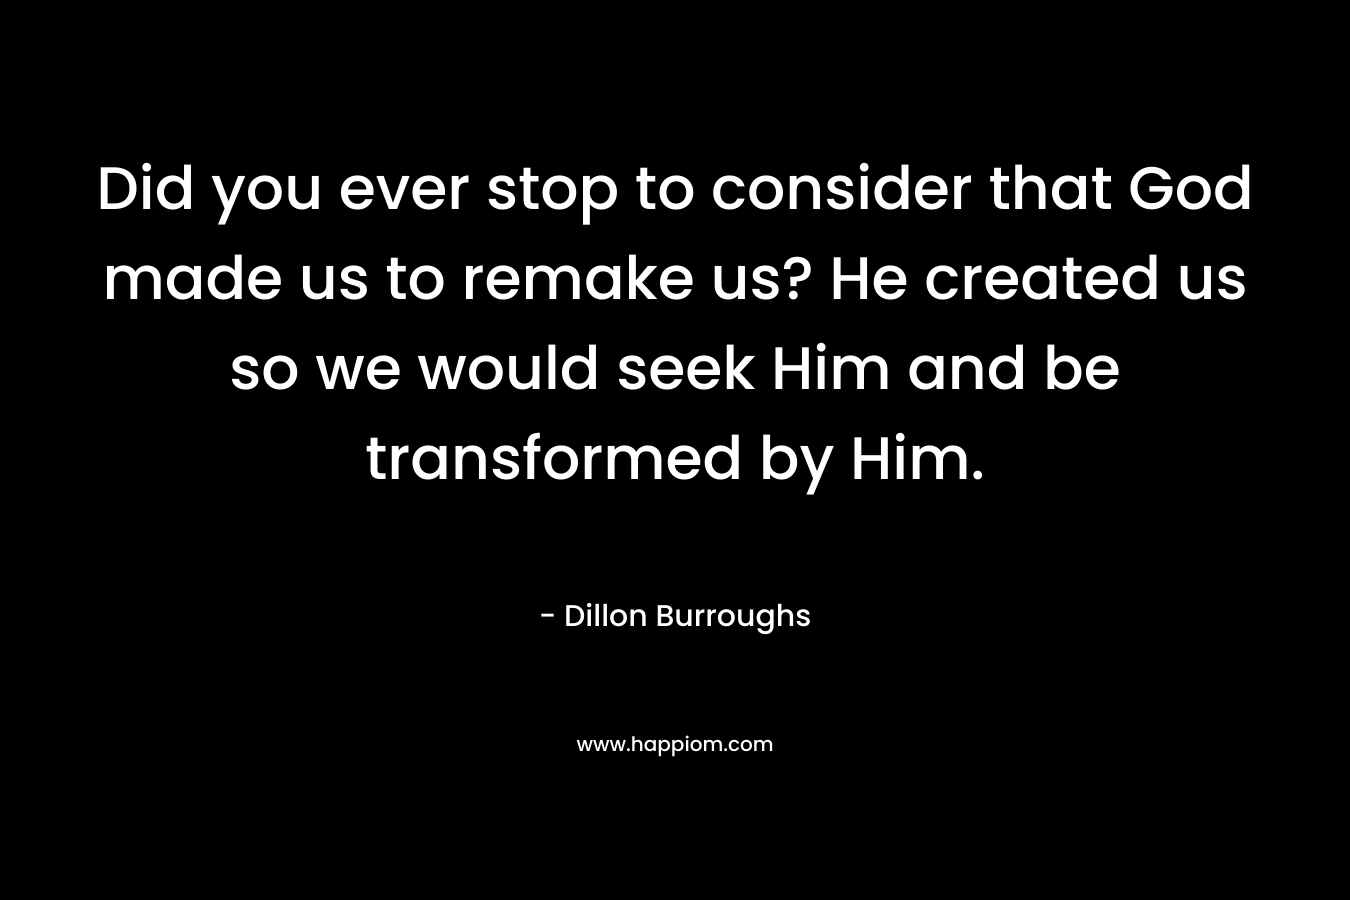 Did you ever stop to consider that God made us to remake us? He created us so we would seek Him and be transformed by Him. – Dillon Burroughs